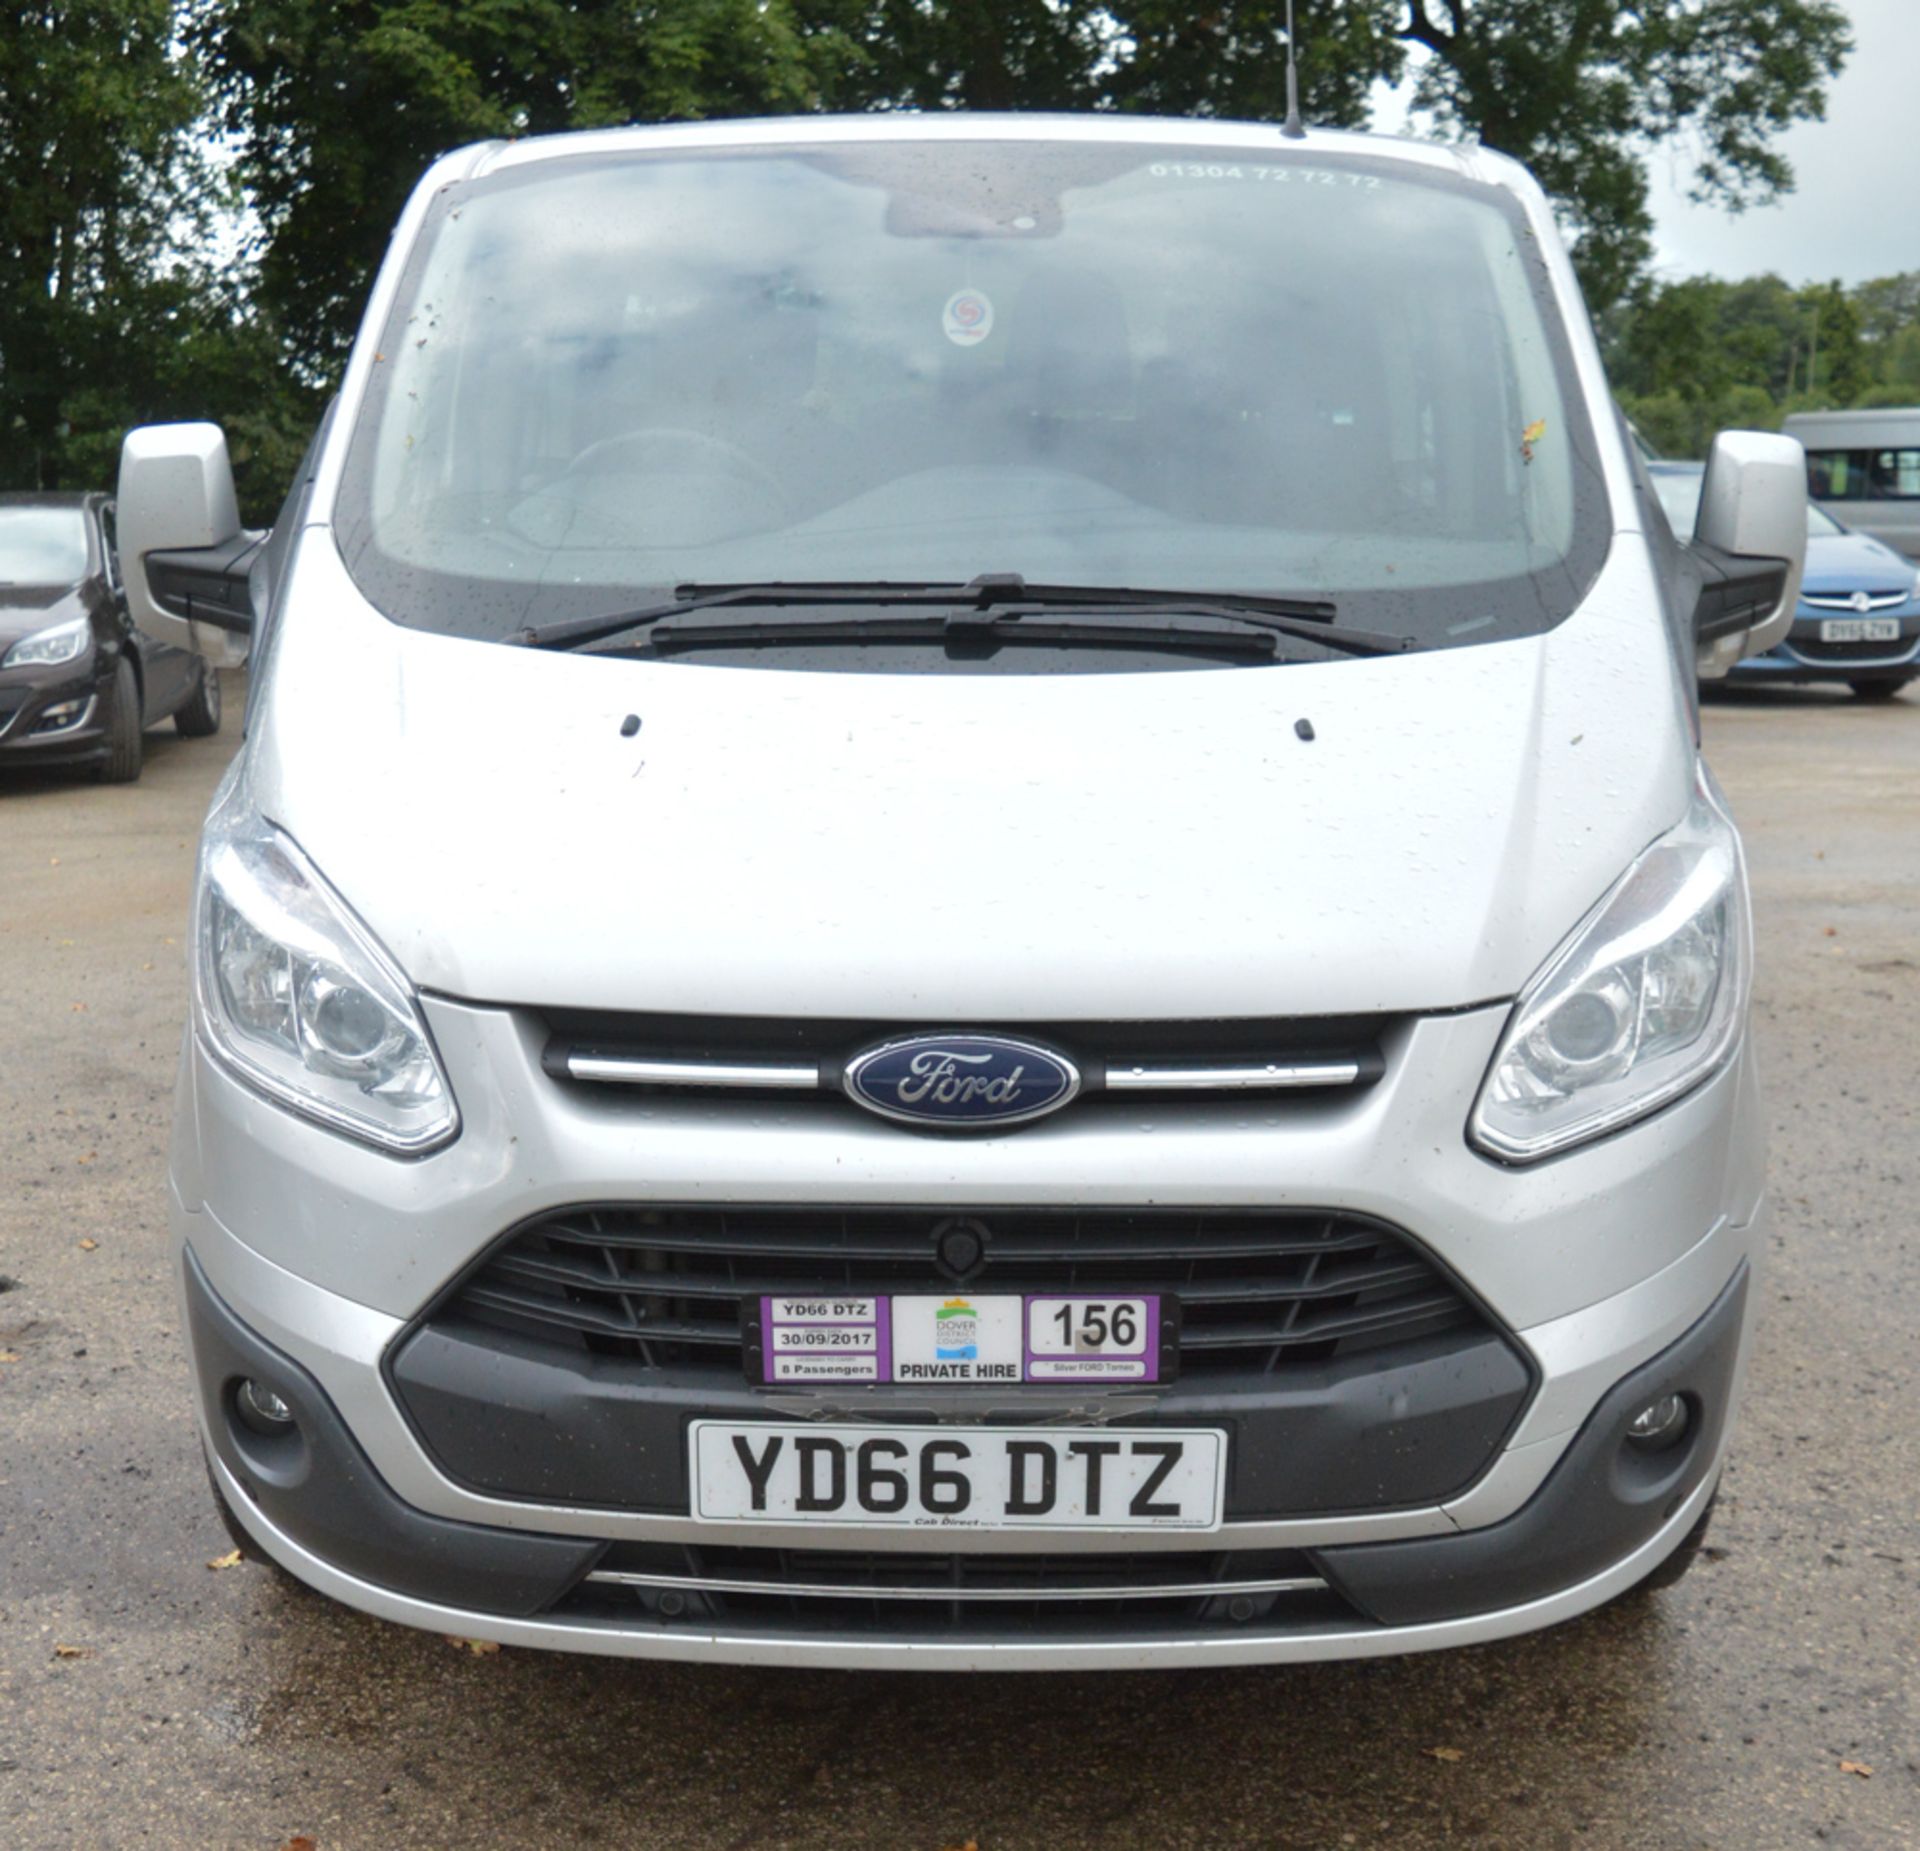 Ford Tourneo Custom 8 seat minibus  Registration Number: YD66 DTZ Date of Registration: 01/09/2016 - Image 5 of 12